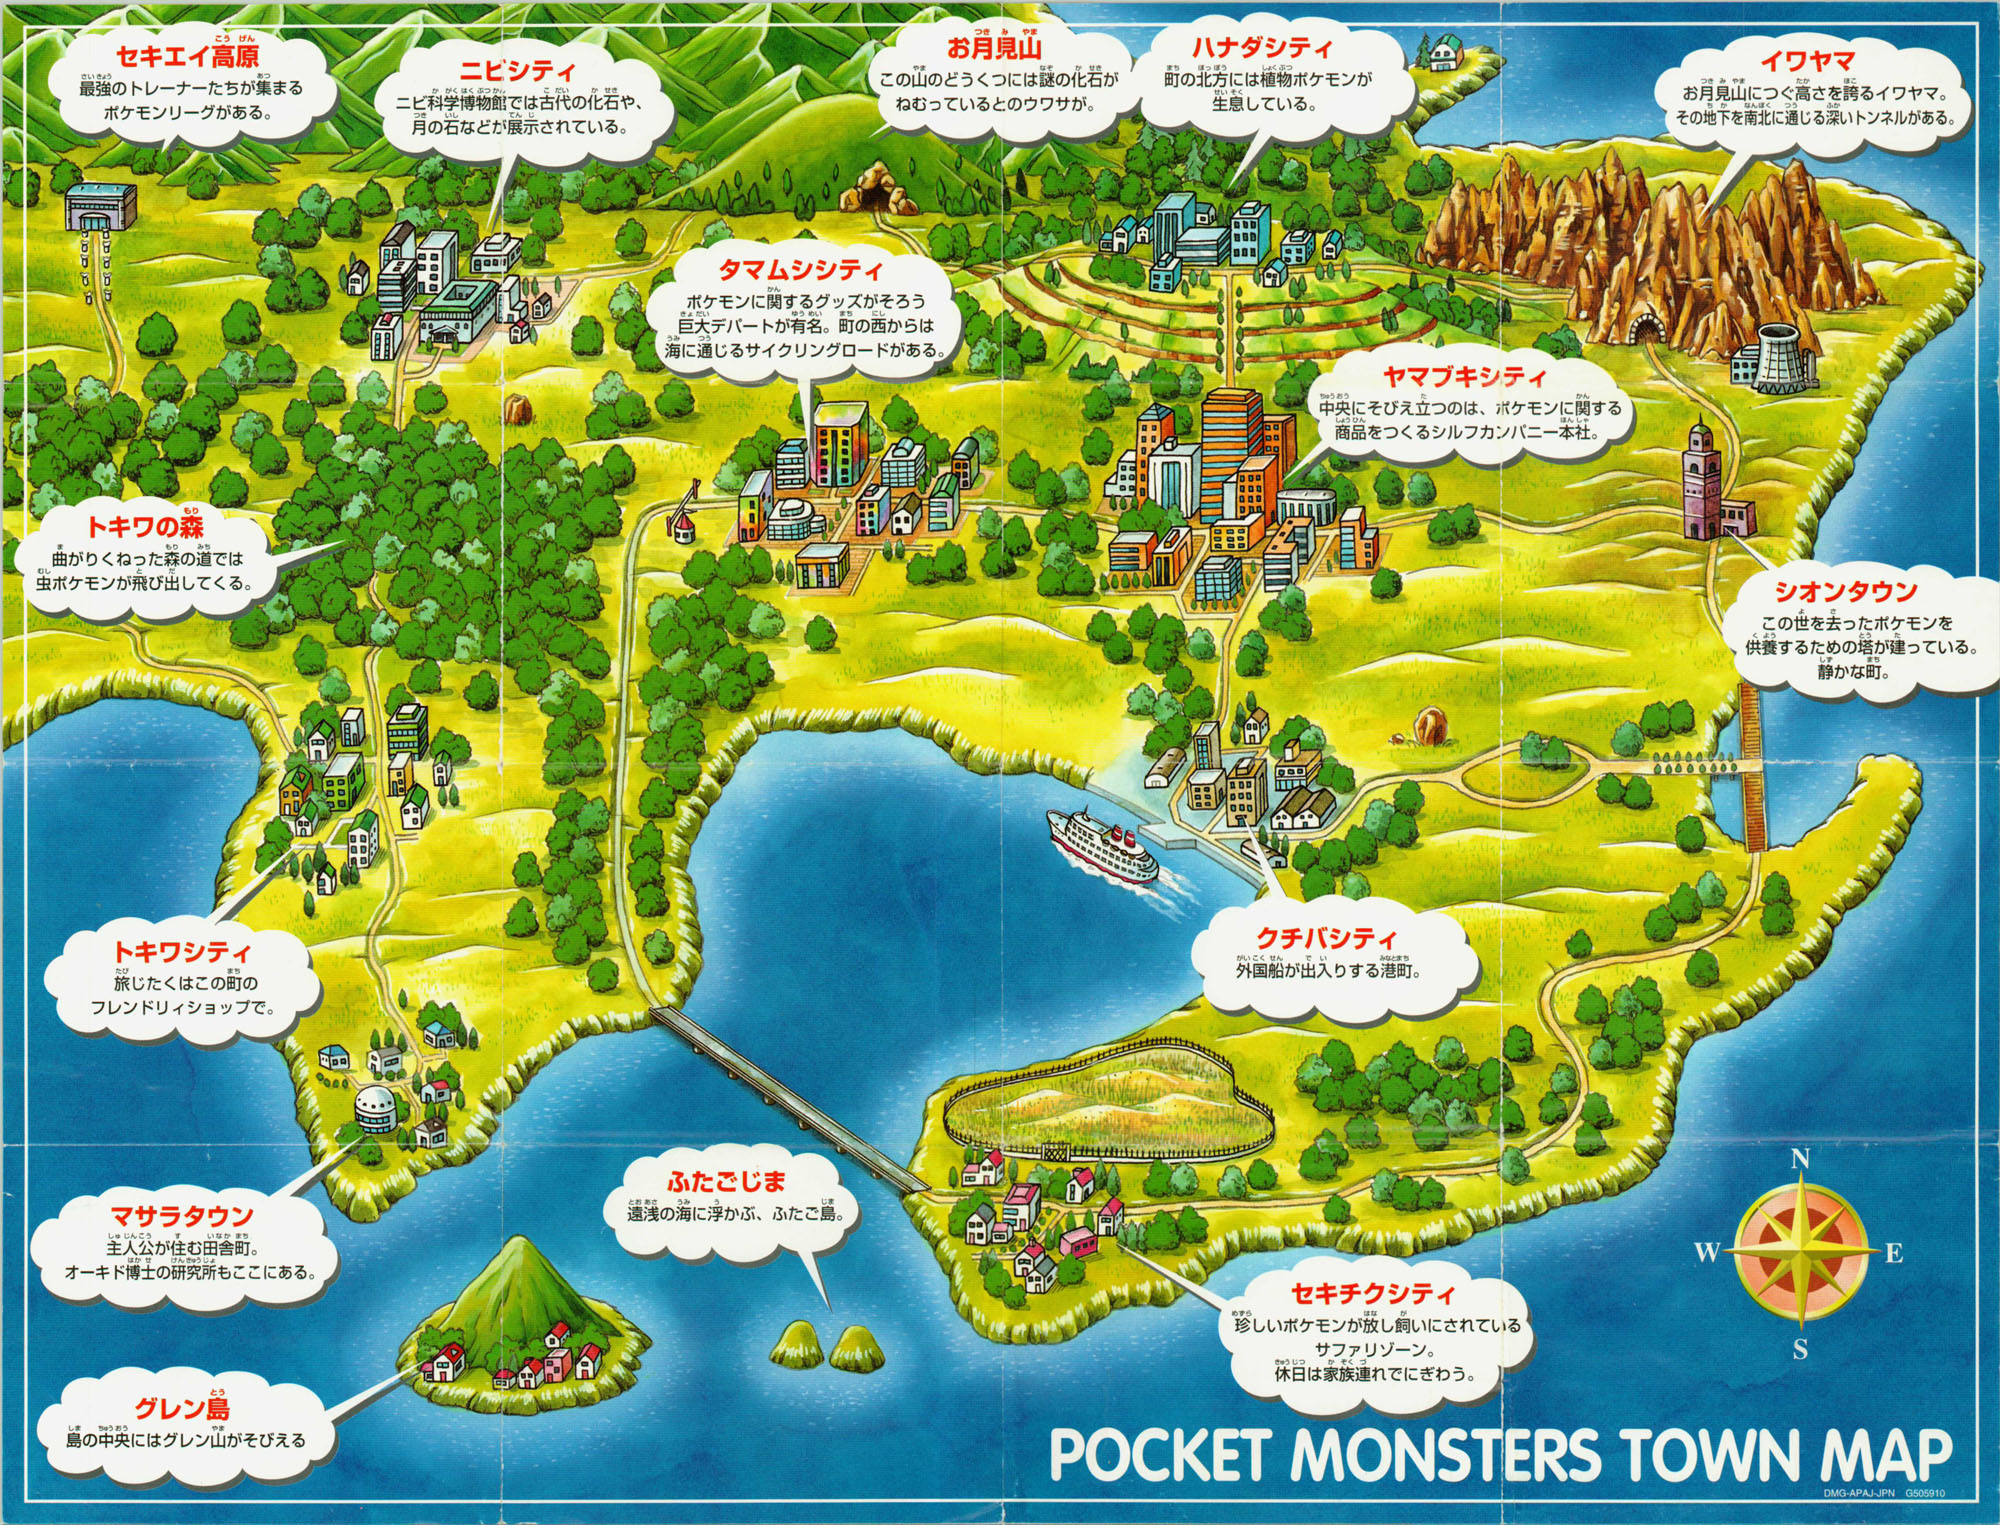 Pocket Monsters Town Map